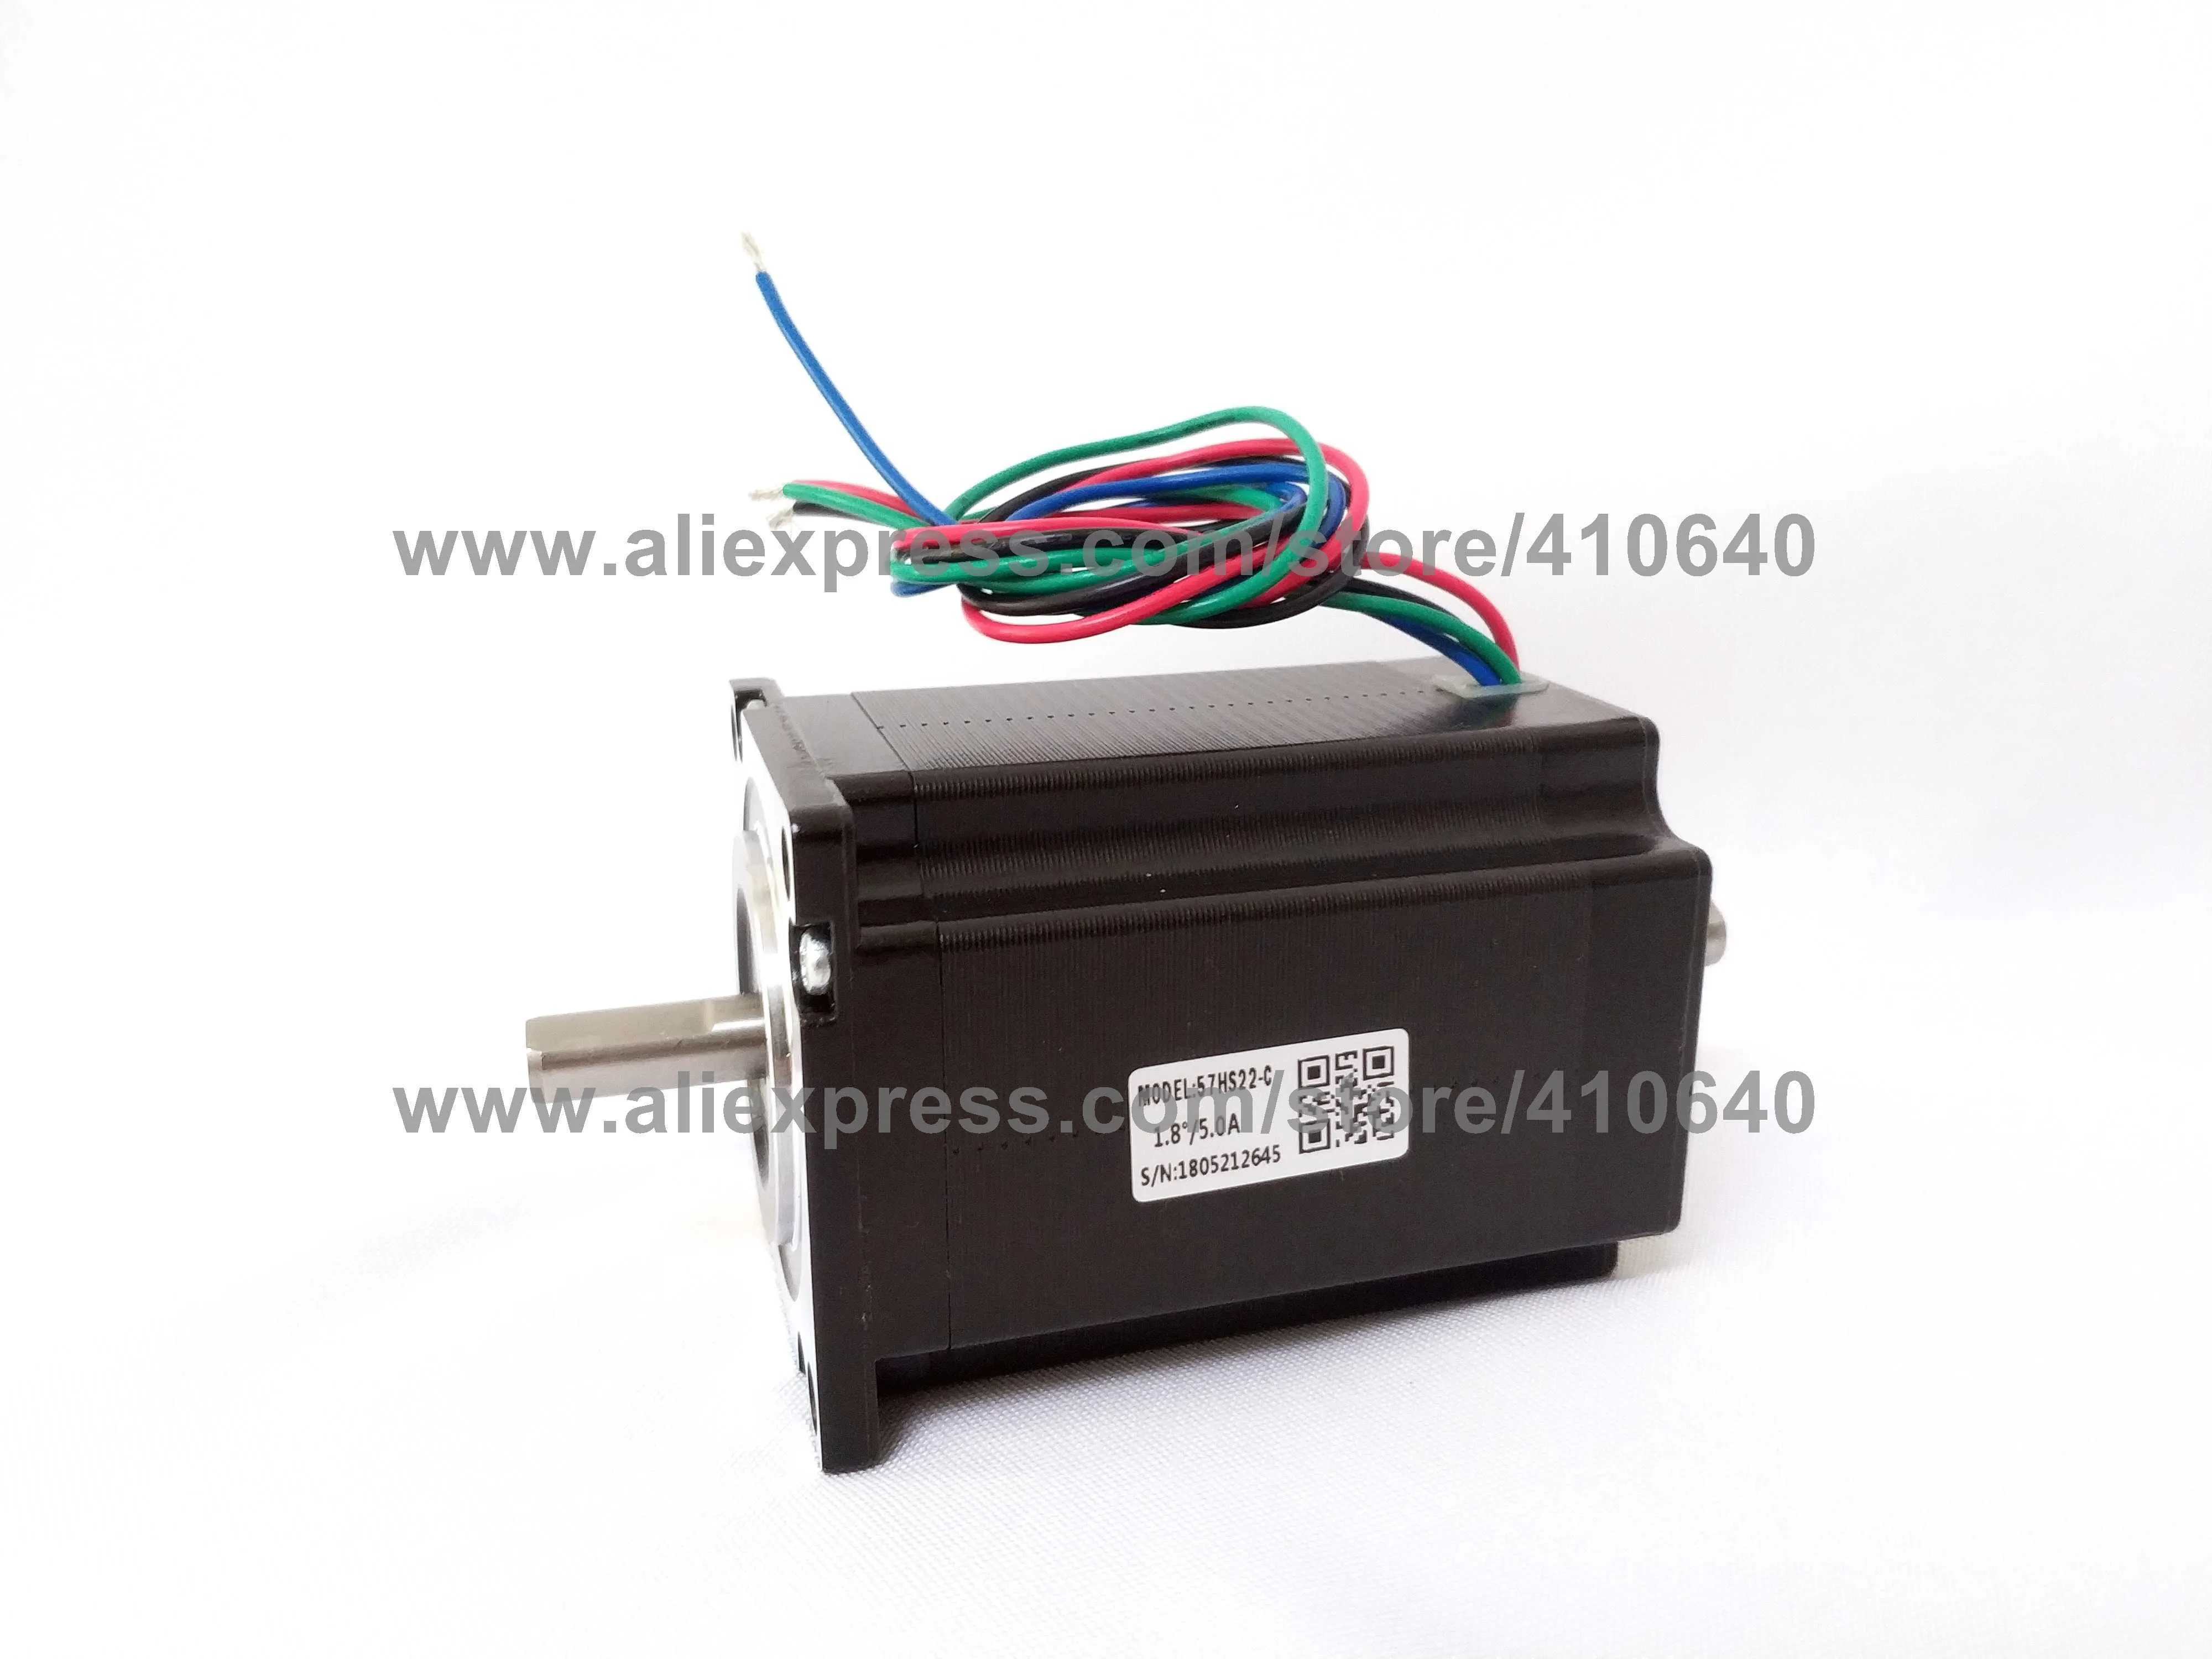 Leadshine Stepper Motor 57HS22-C 4 Wires (12)